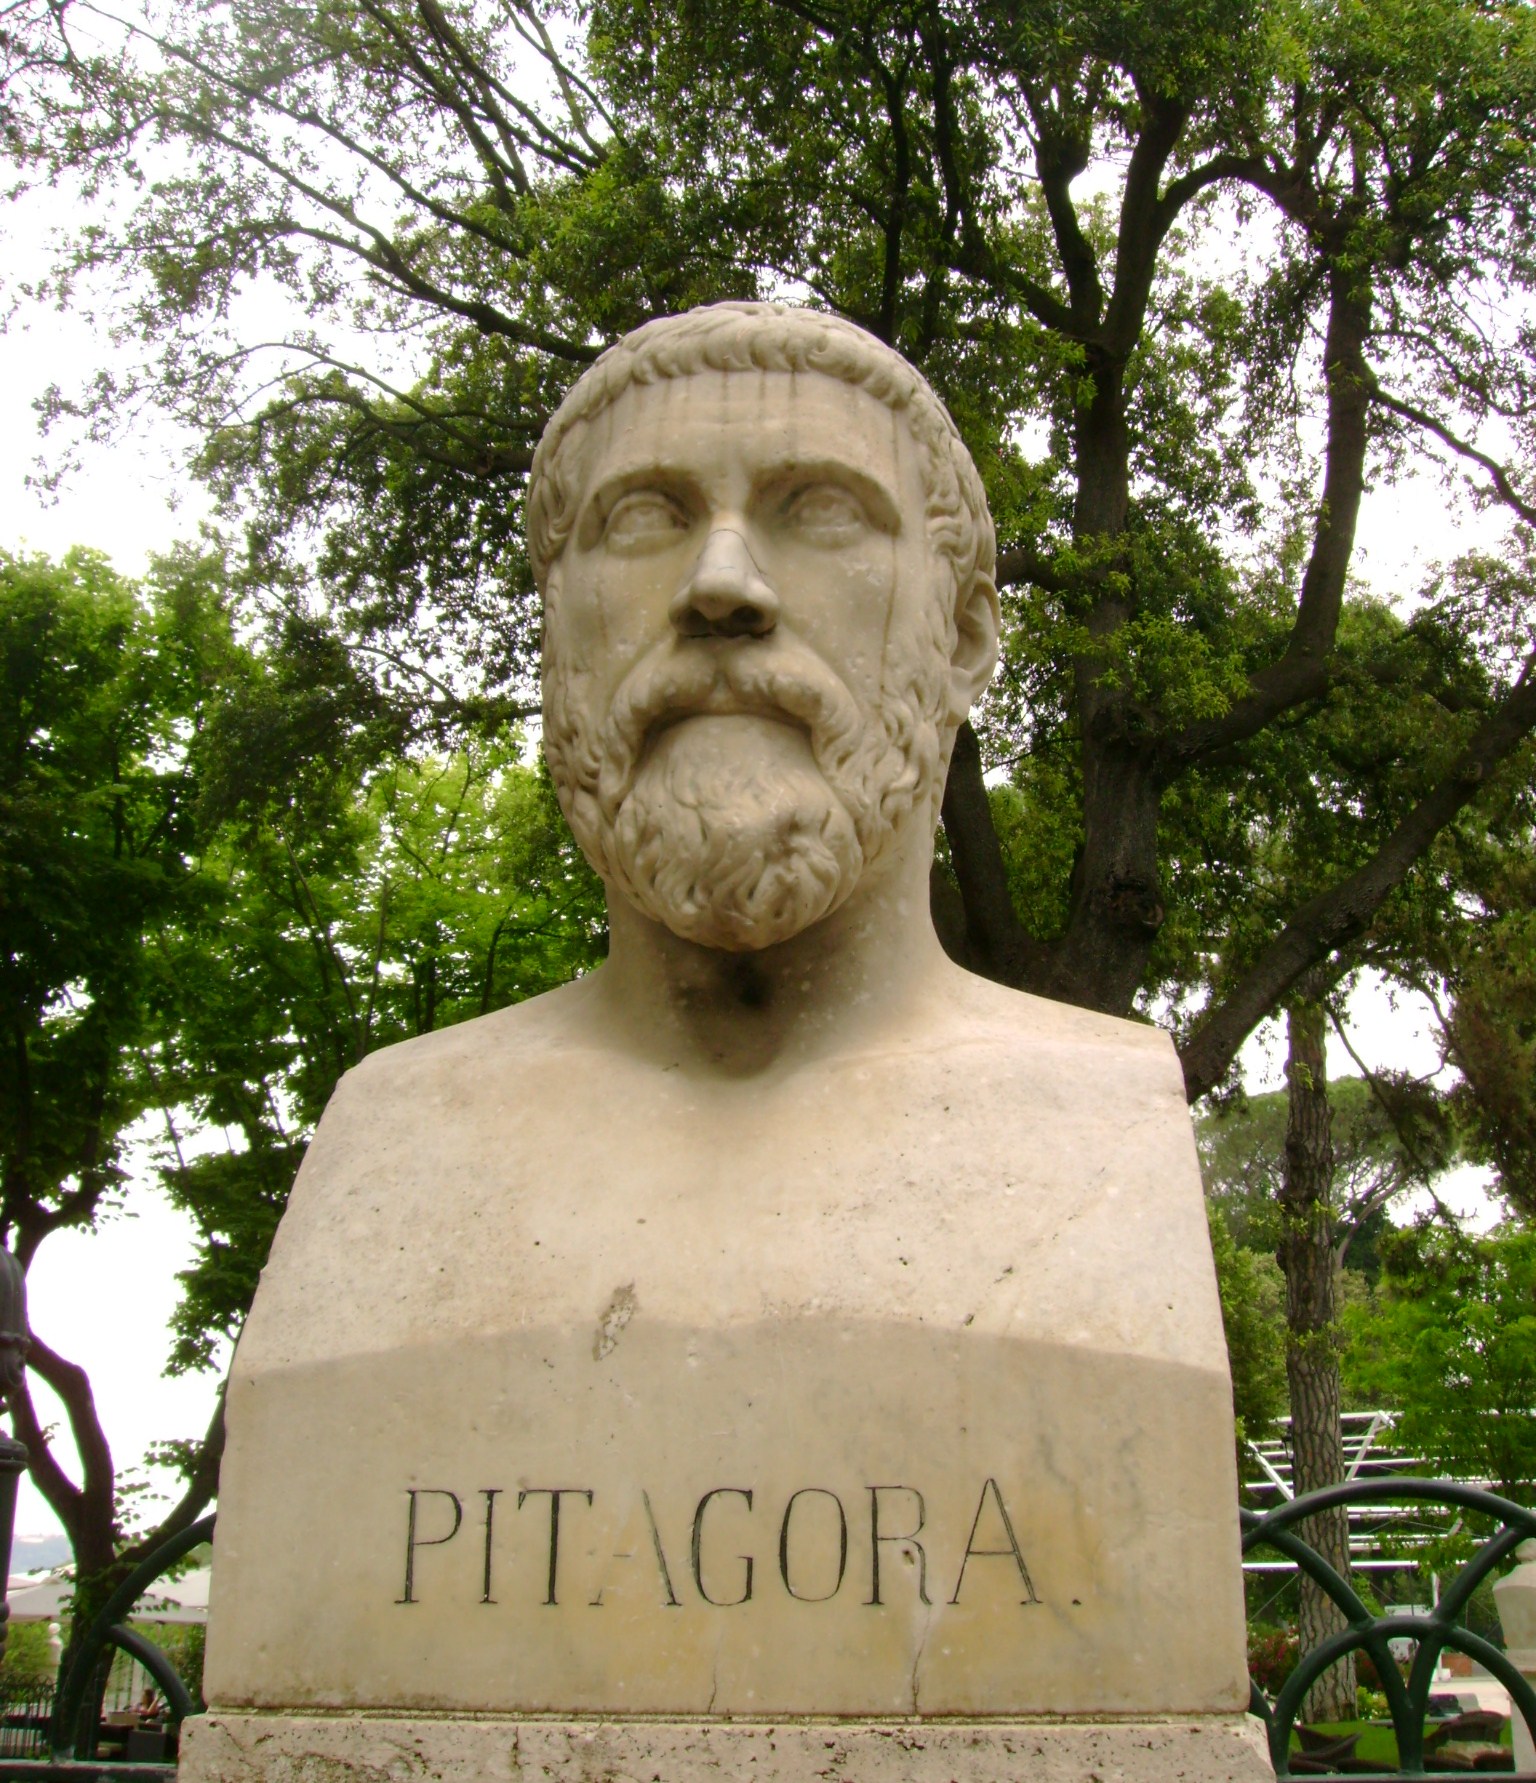 a statue of the famous pelicaa in the park